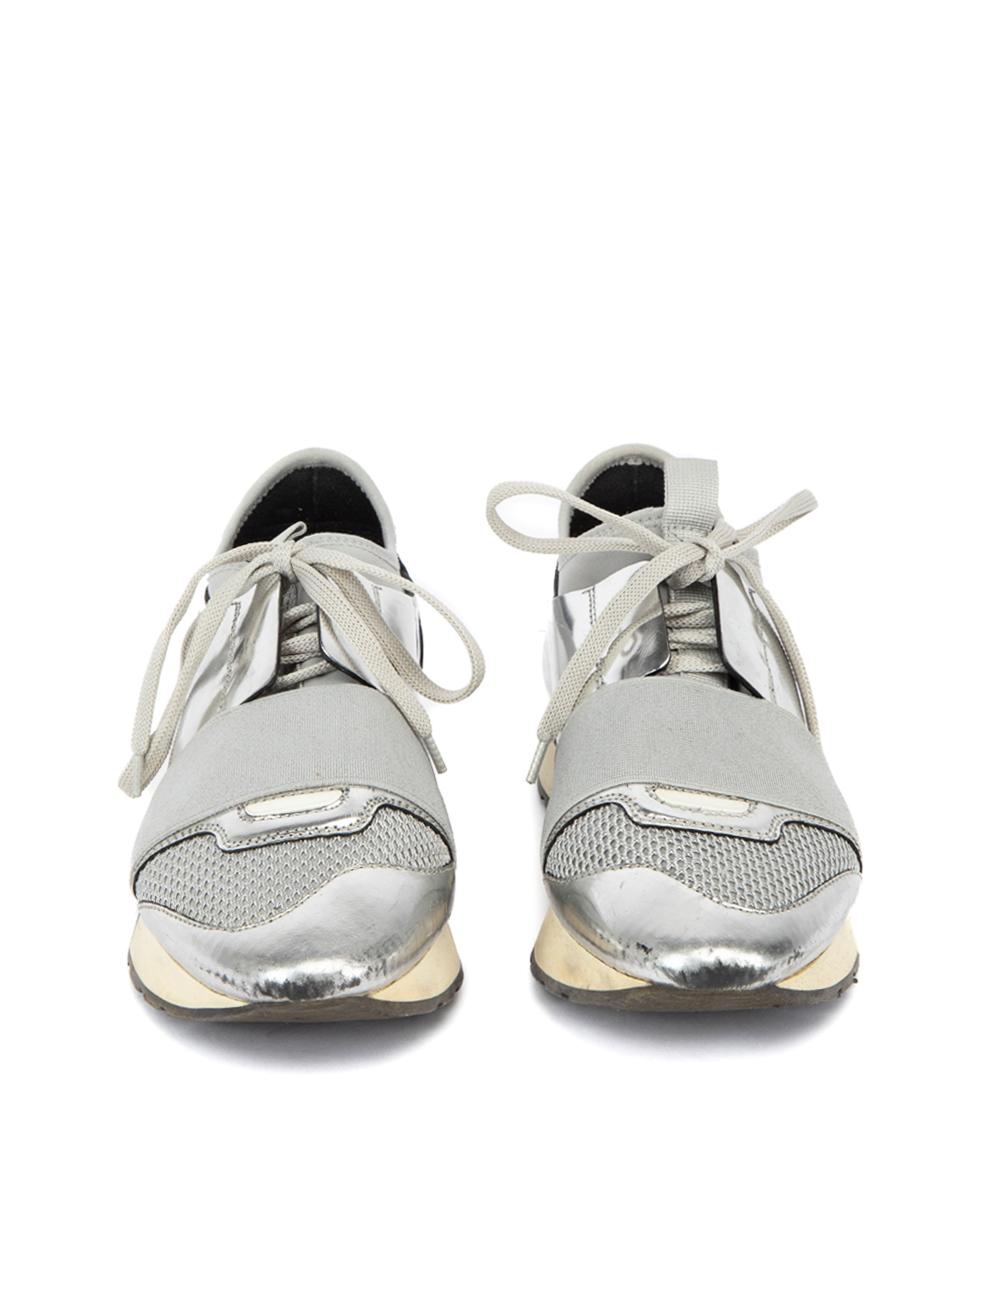 Balenciaga Women's Sliver Race Runner Trainers In Good Condition For Sale In London, GB